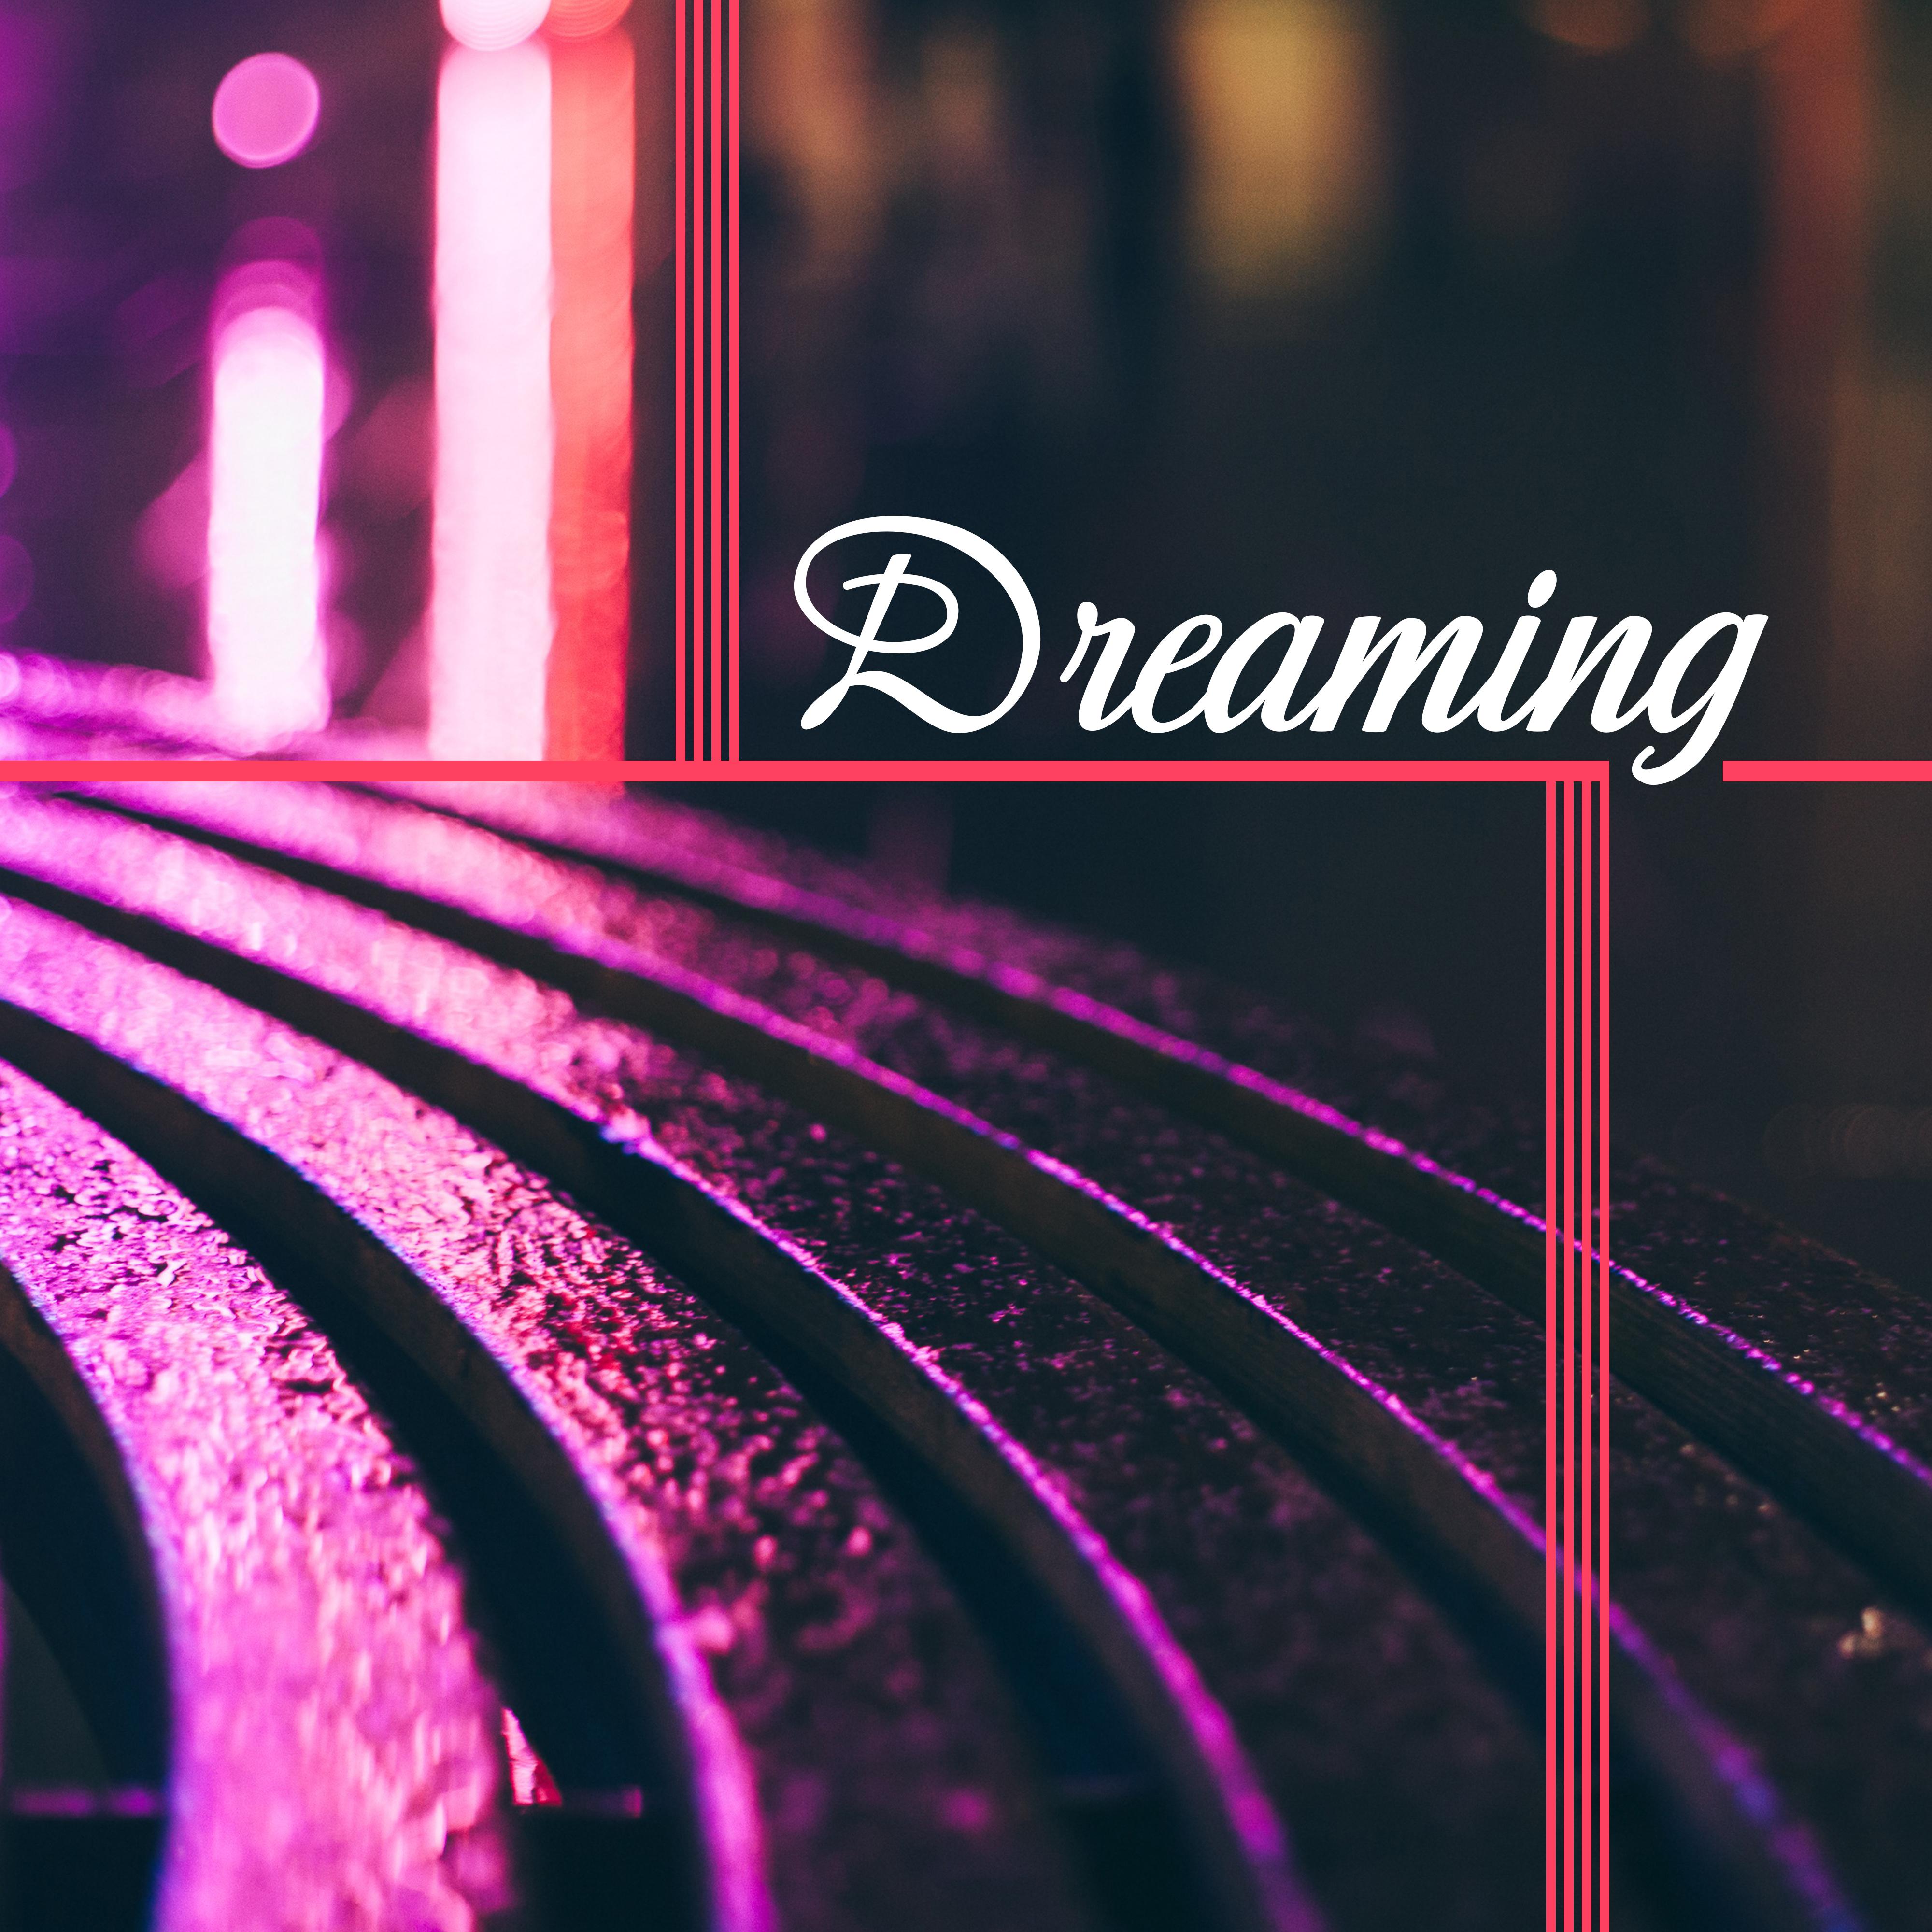 Dreaming – Calming Music for Relaxation, Deep Sleep, Meditation Before Sleep, Natural White Noise